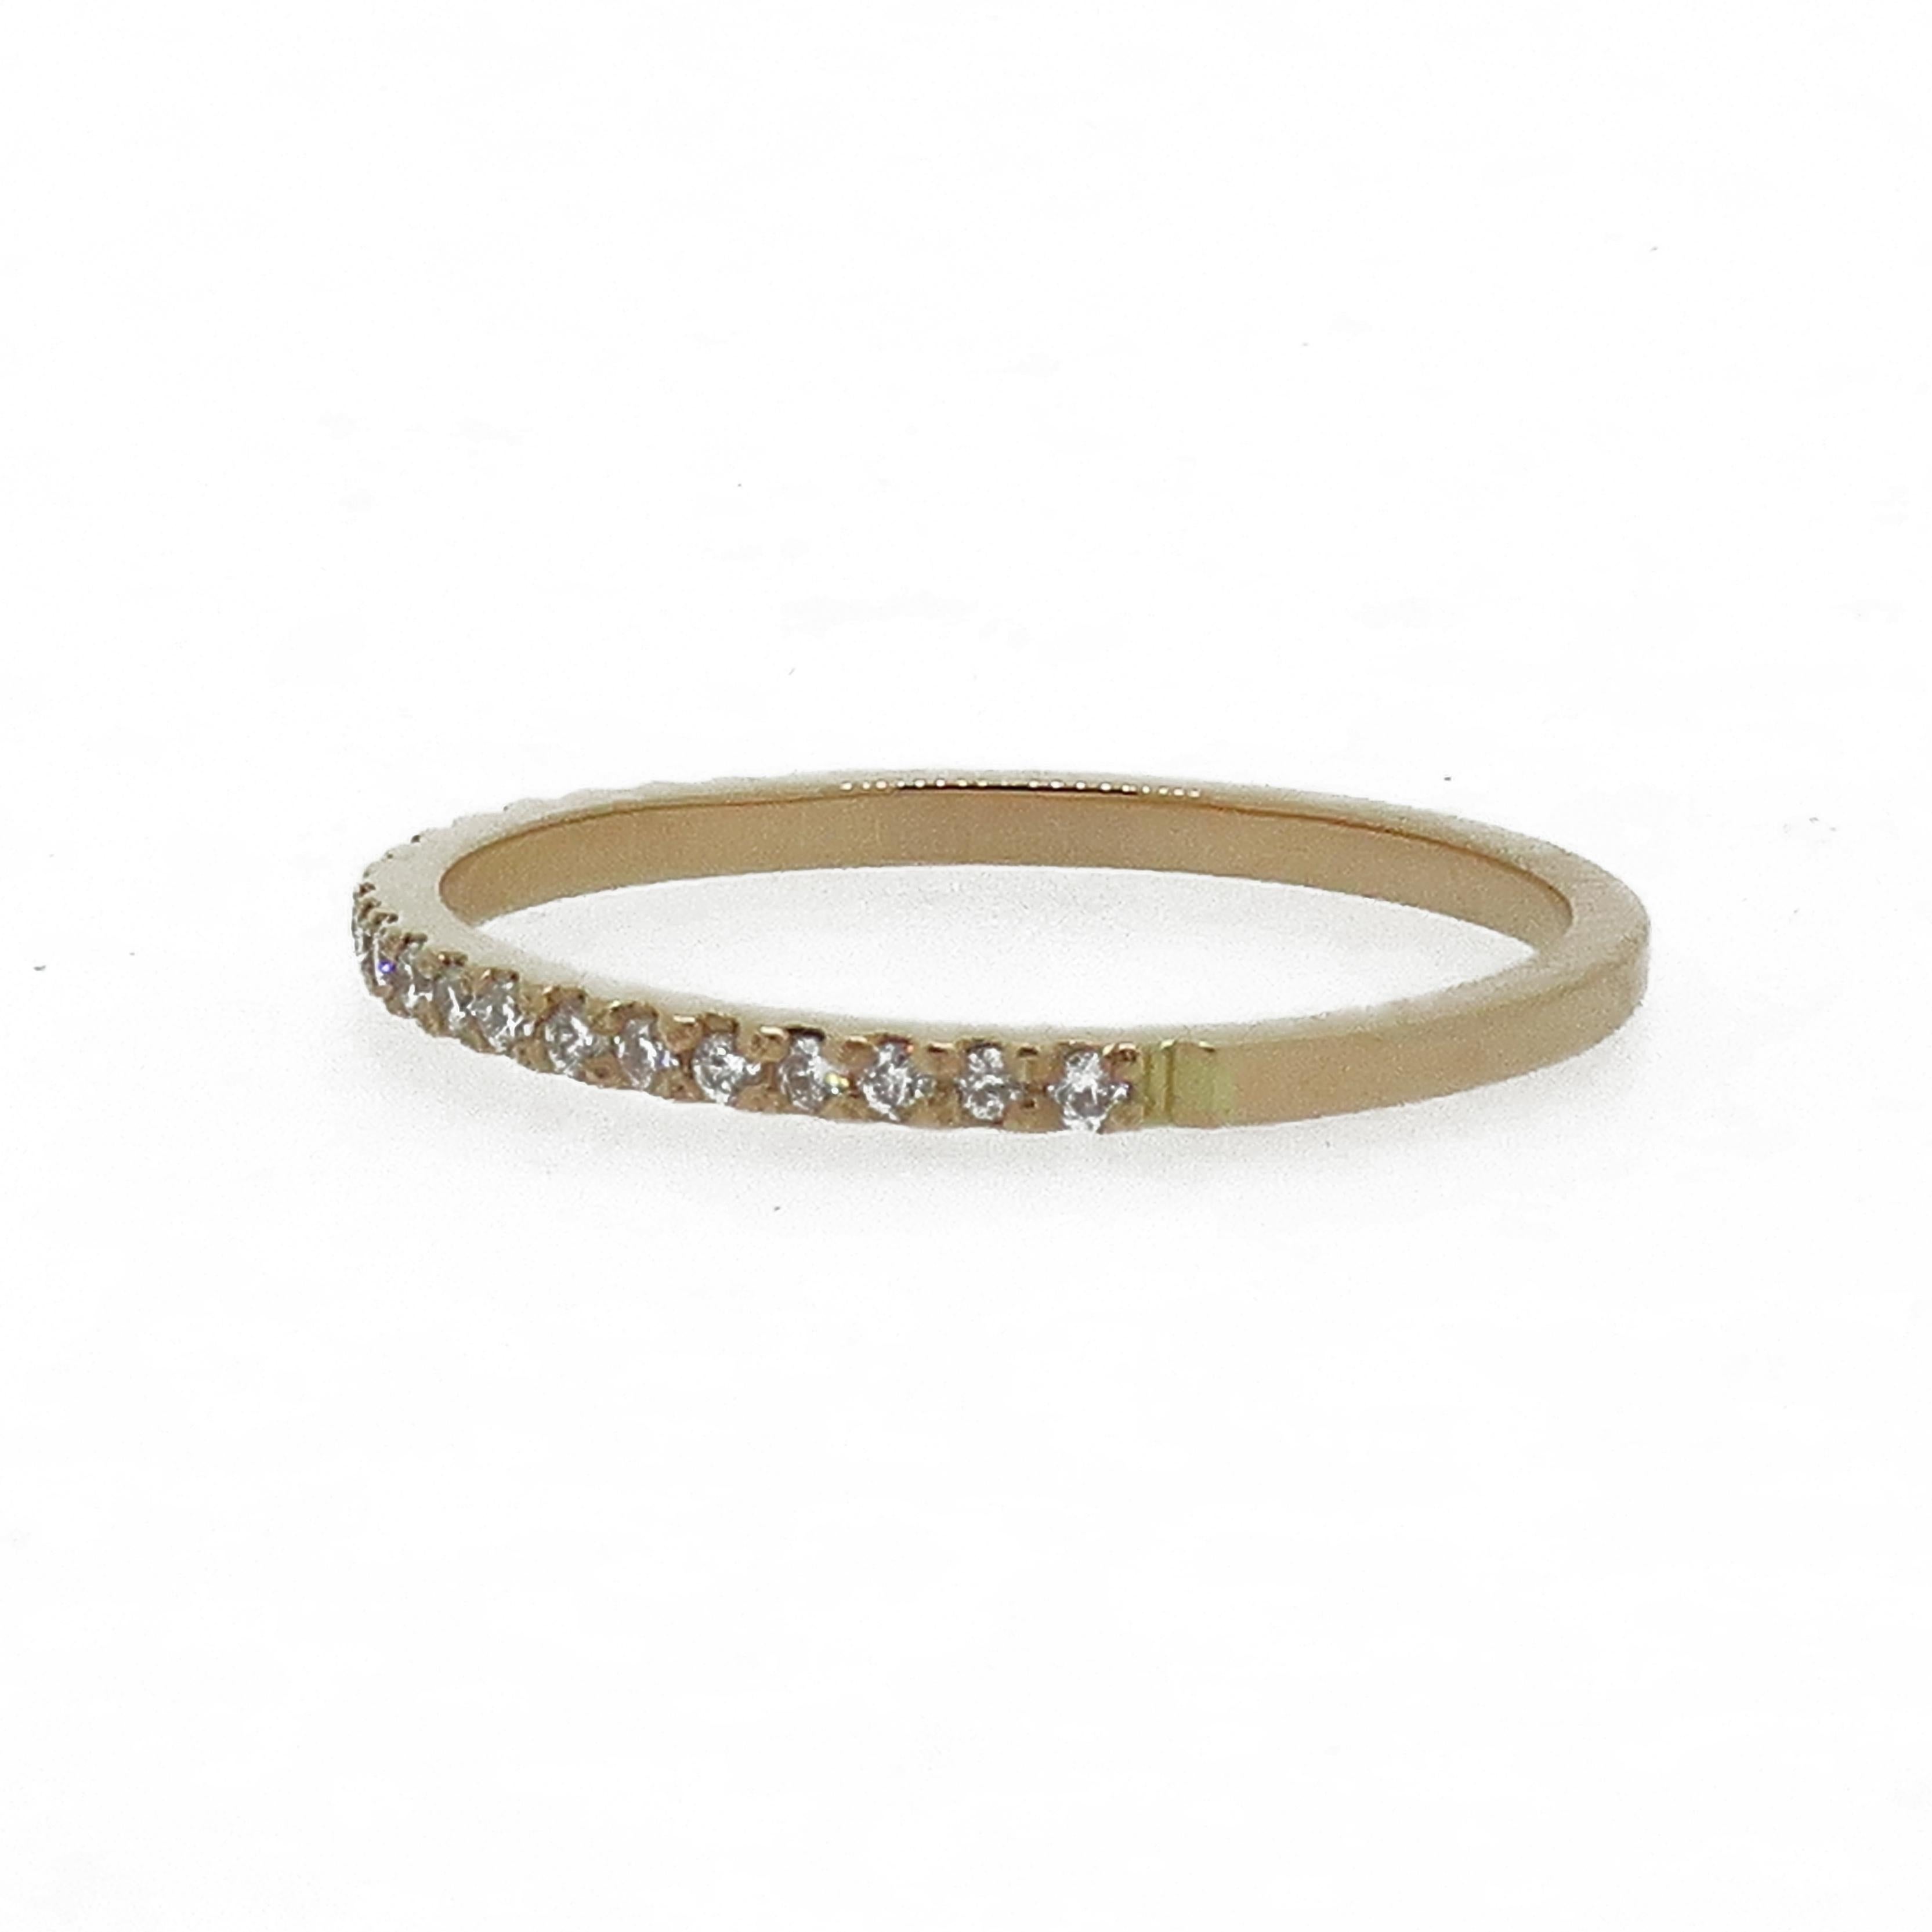 18 Karat Rose Gold Diamond Eternity Band Ring

A dainty diamond eternity ring. Consisting of twenty-one small brilliant cut diamonds all in a micro claw setting. All mounted in 18ct rose gold.
This would make the perfect wedding band or simply just